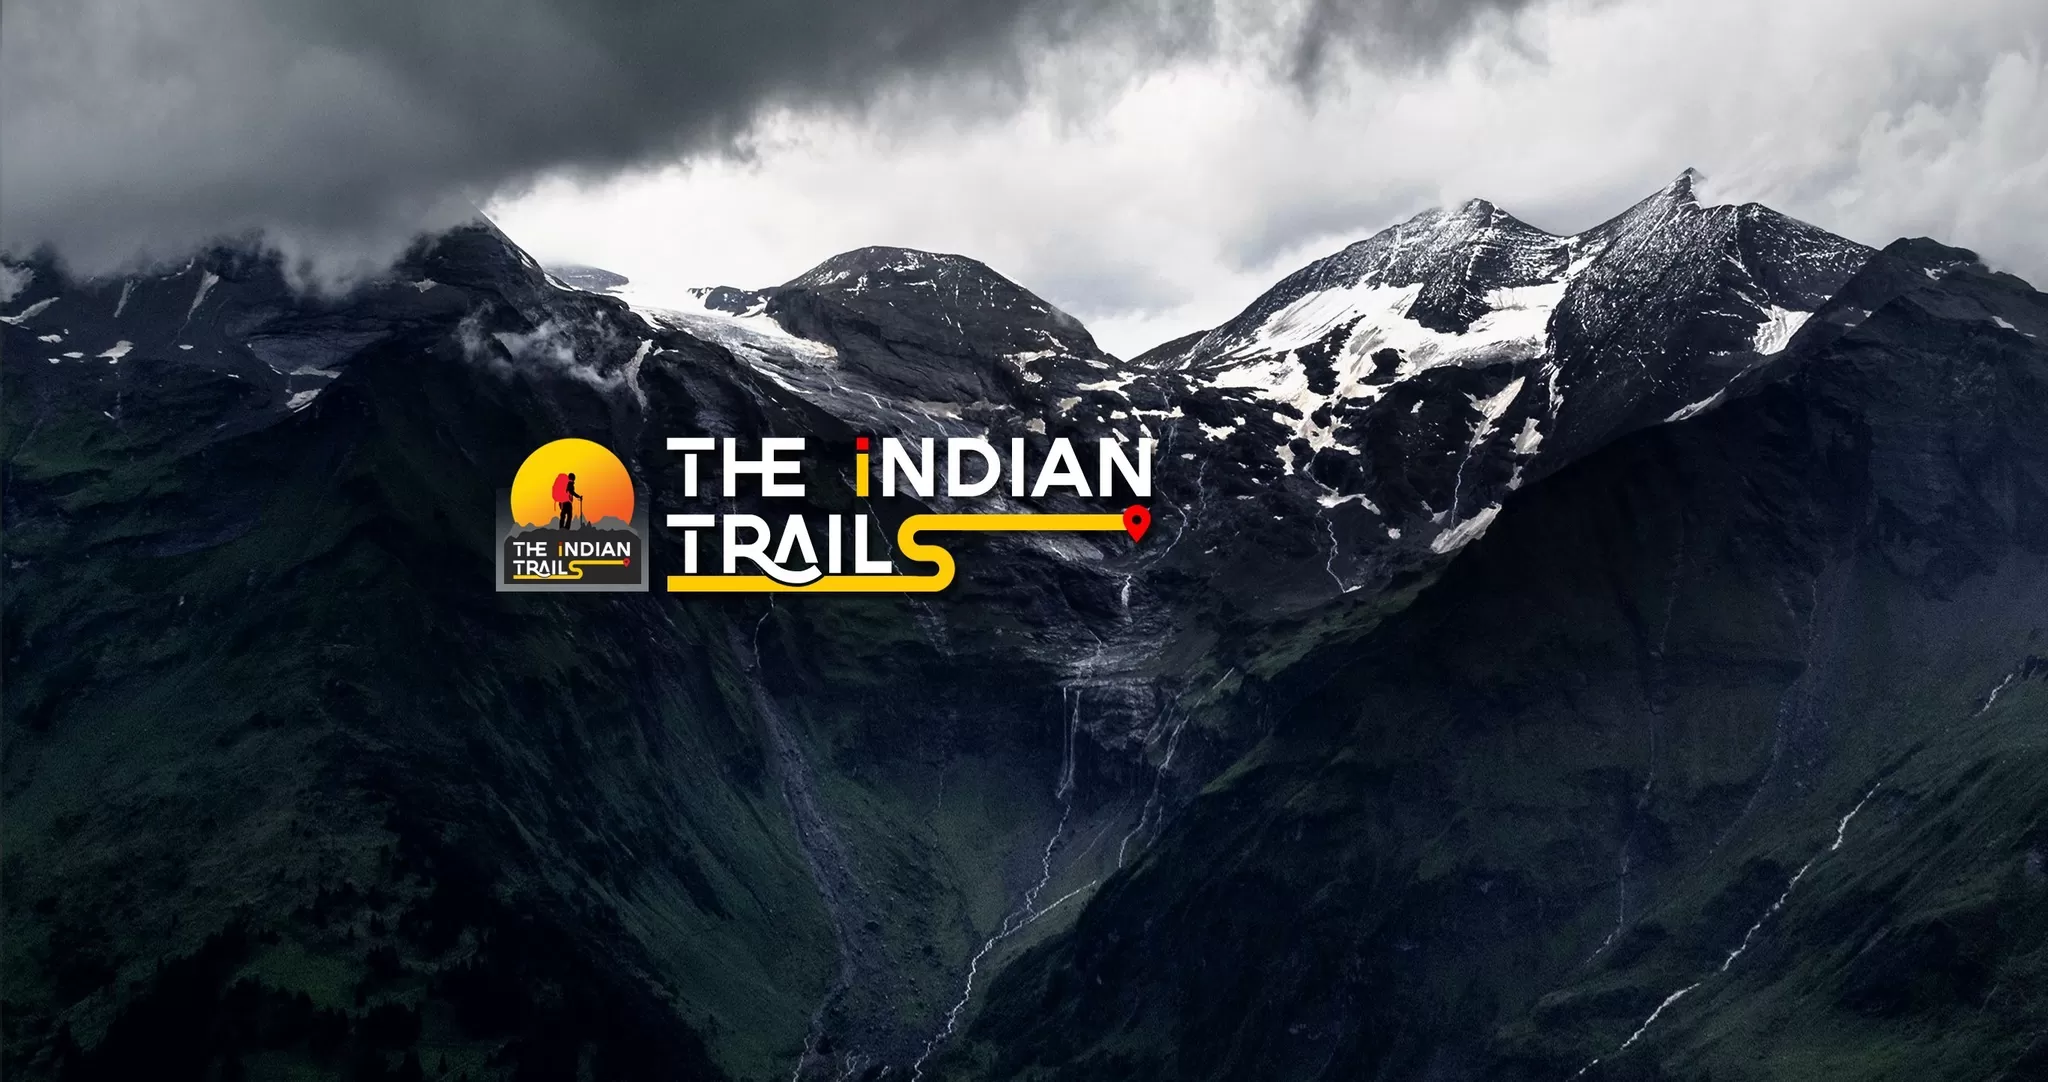 Cover Image of MUhammed Unais P (TheIndianTrails)